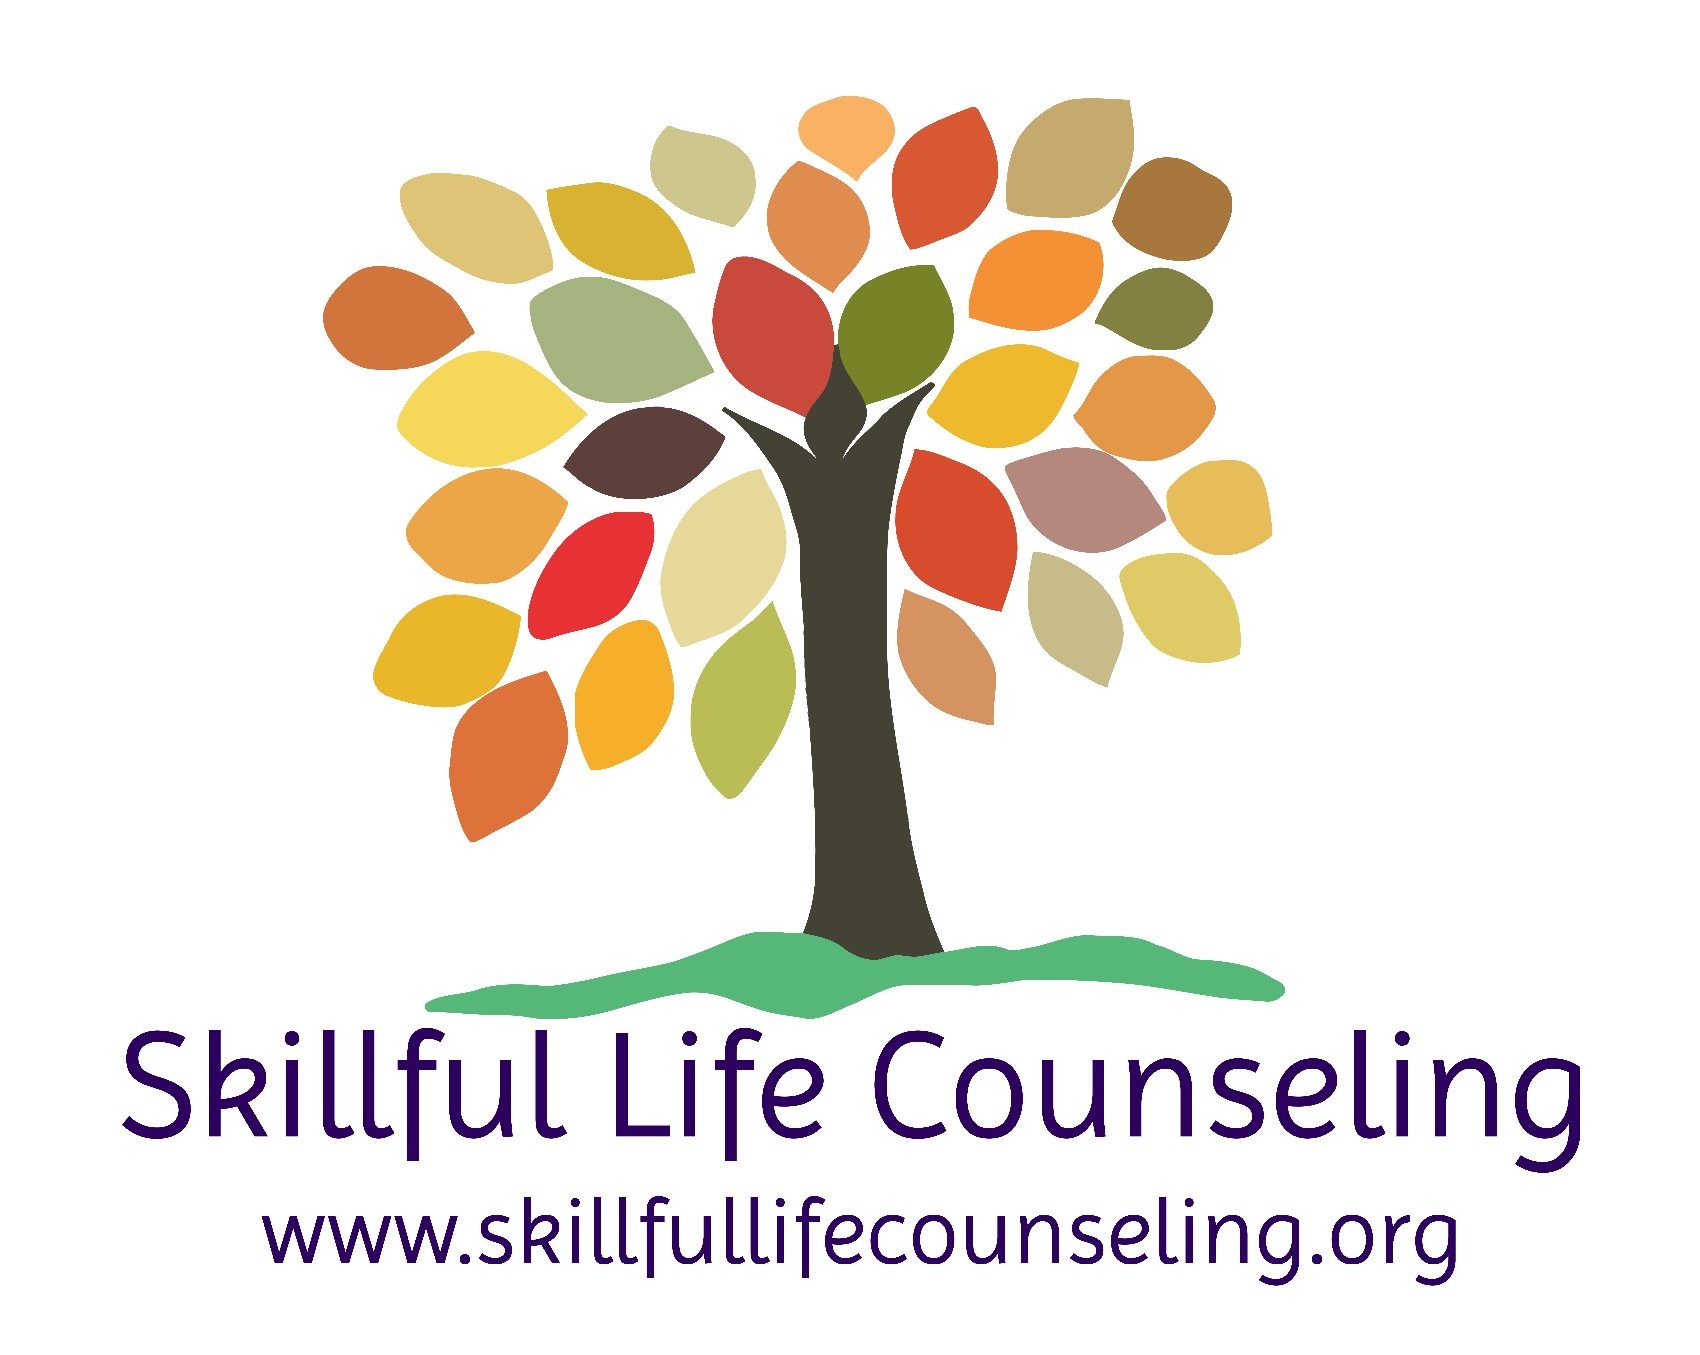 Skillful Life Counseling